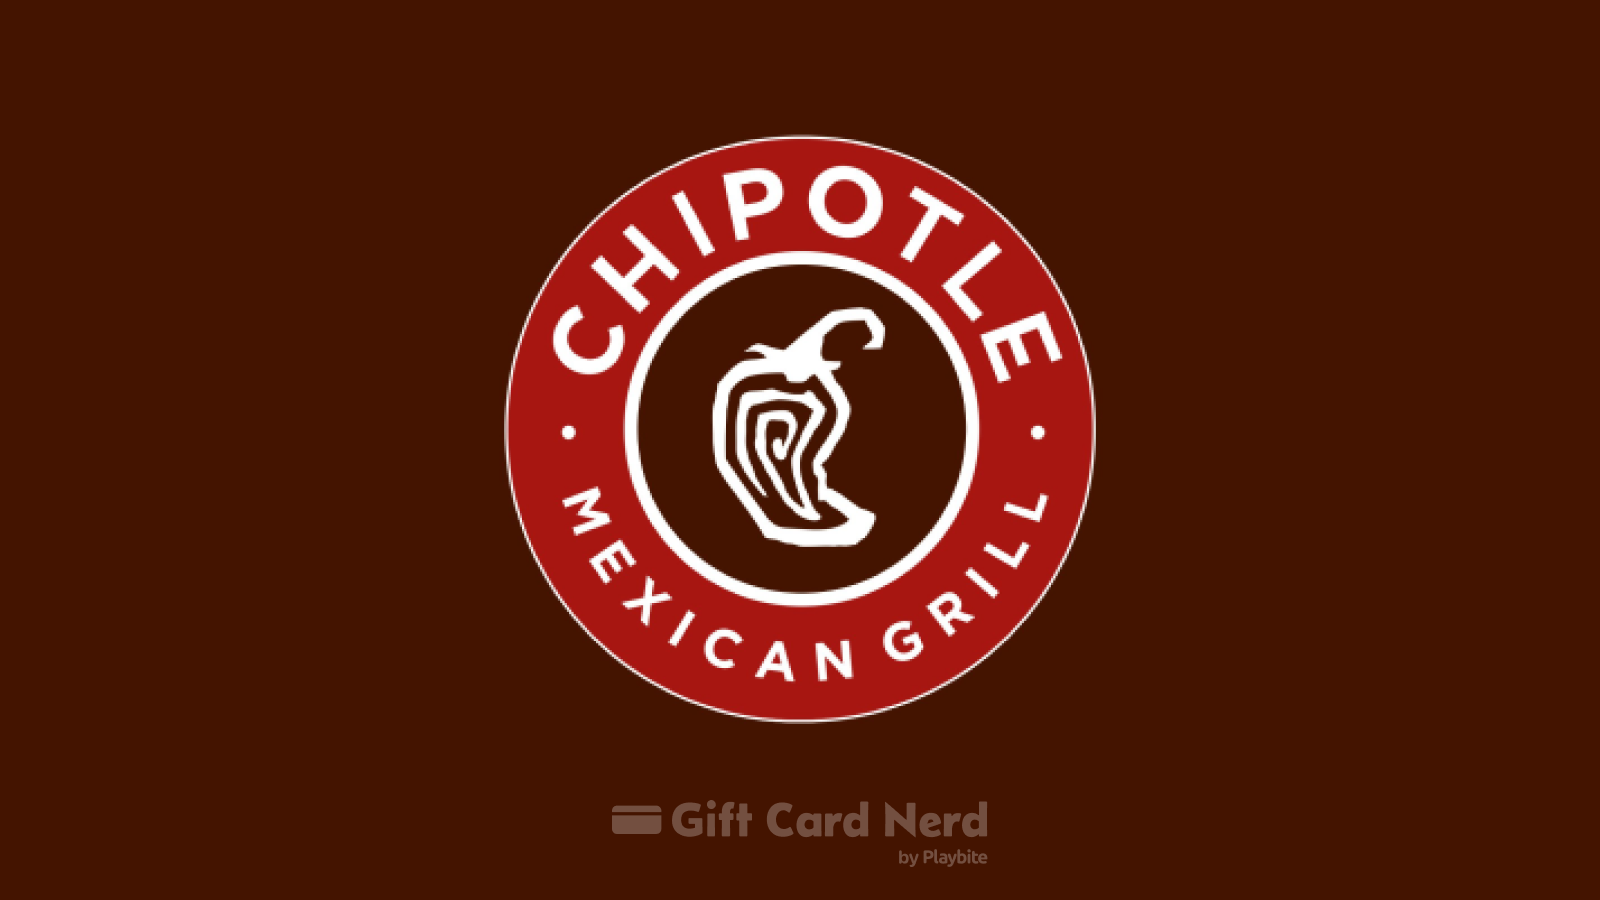 Can I Use a Chipotle Gift Card on Google Play Store?